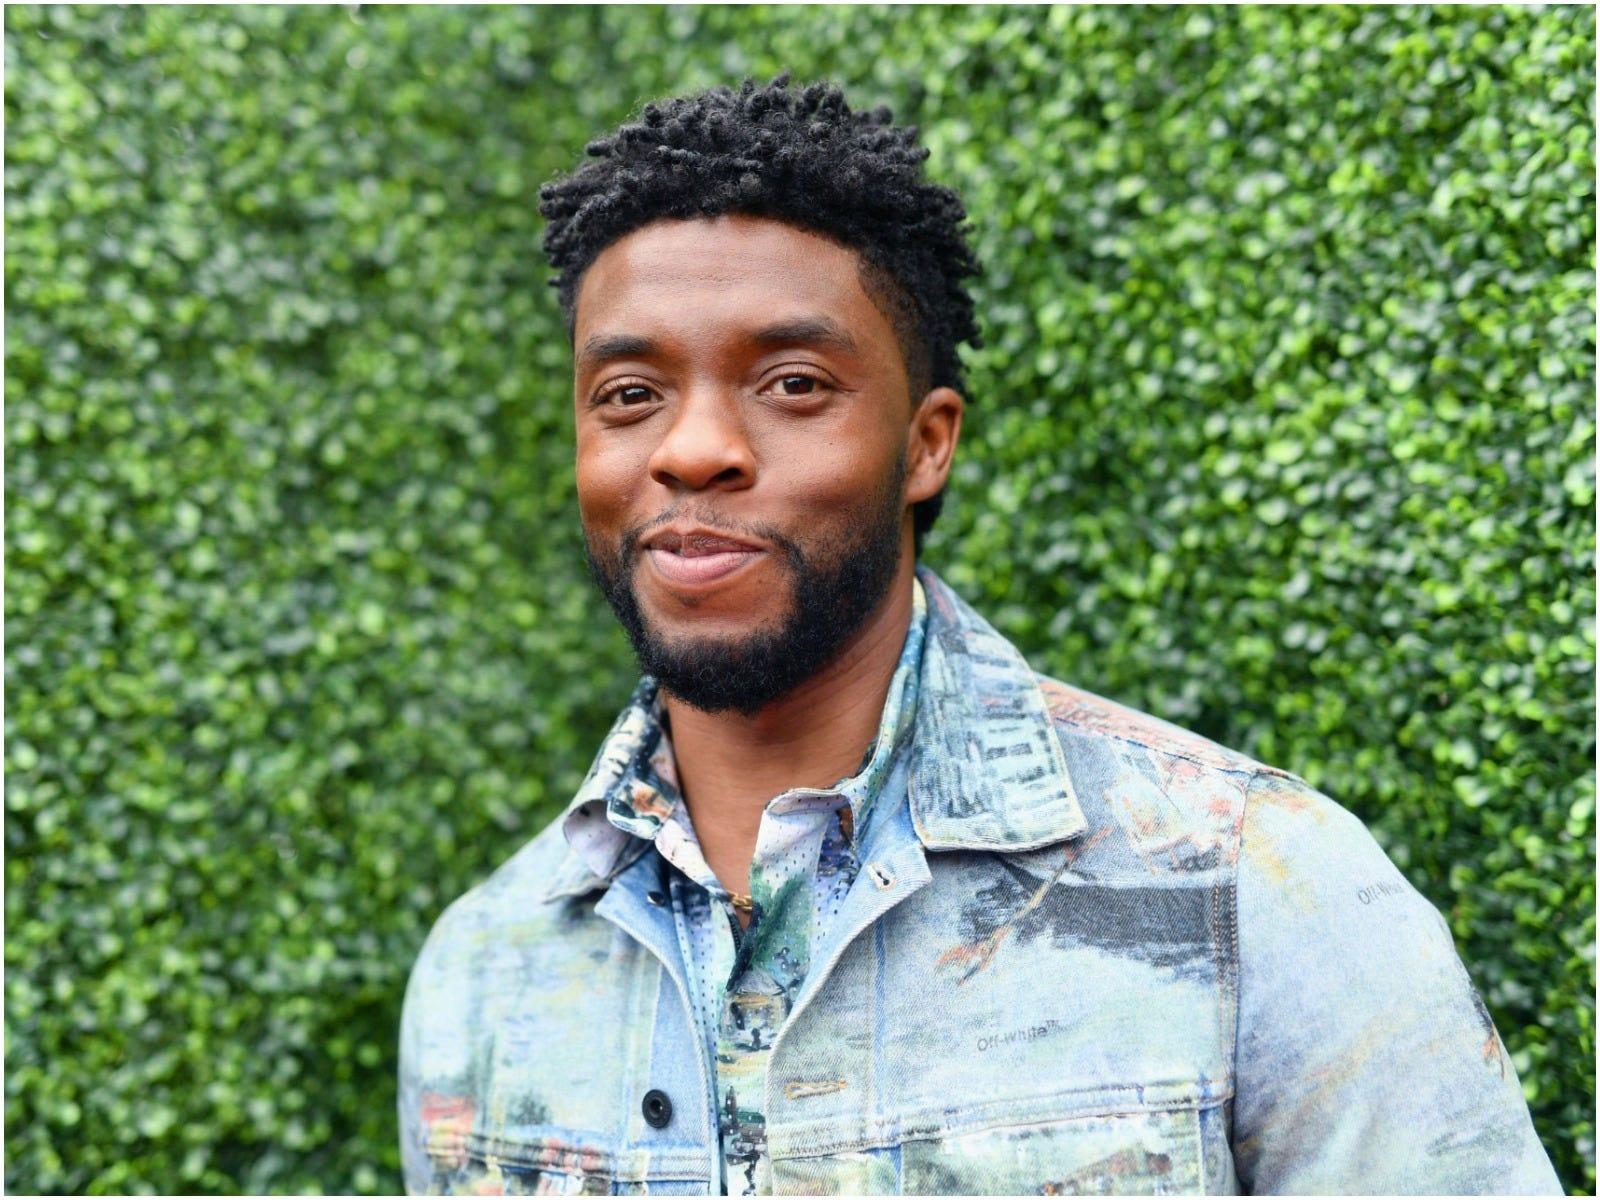 Kids were asked who Chadwick Boseman is at the Golden ...